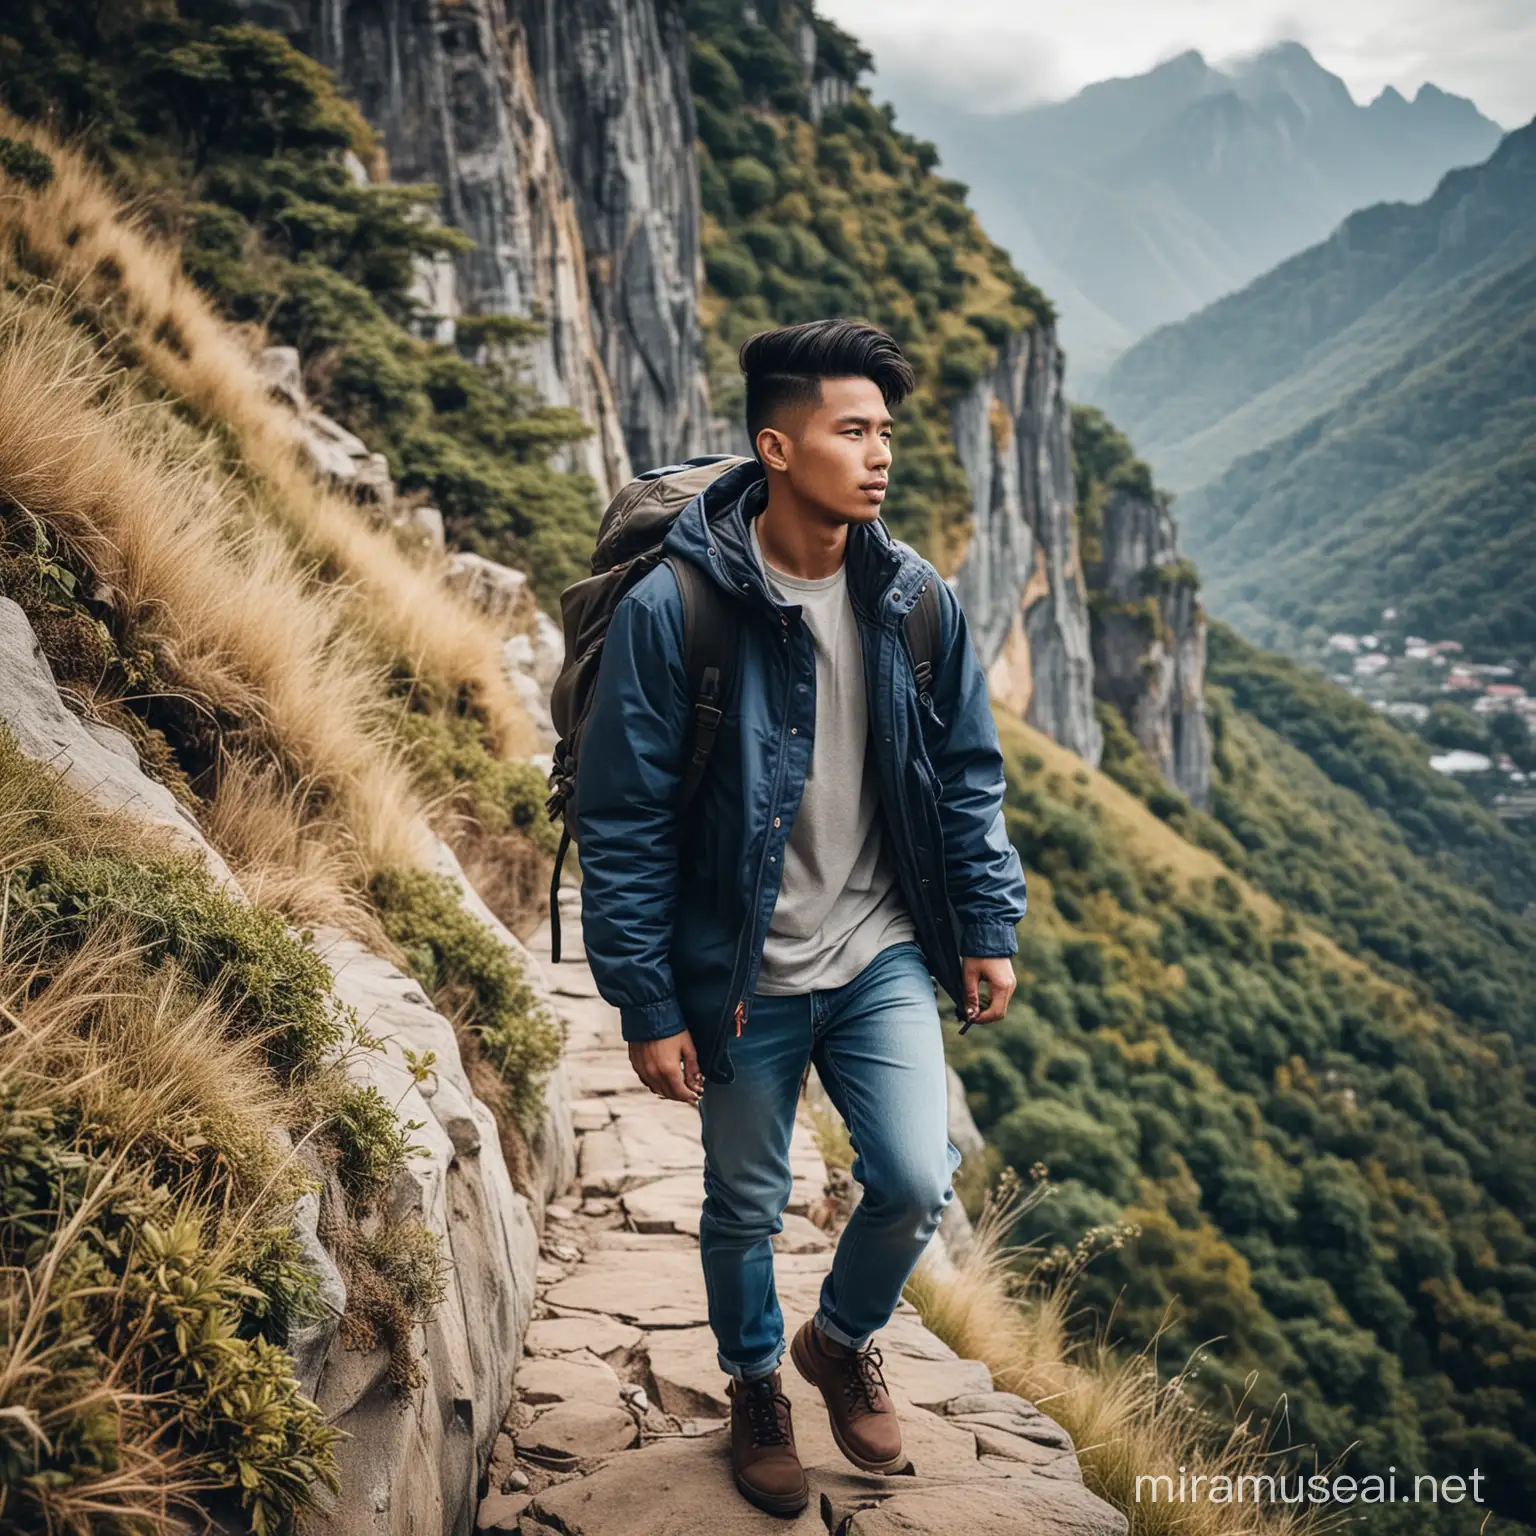 Young Indonesian Man Climbing Steep Cliff in Mountainous Landscape